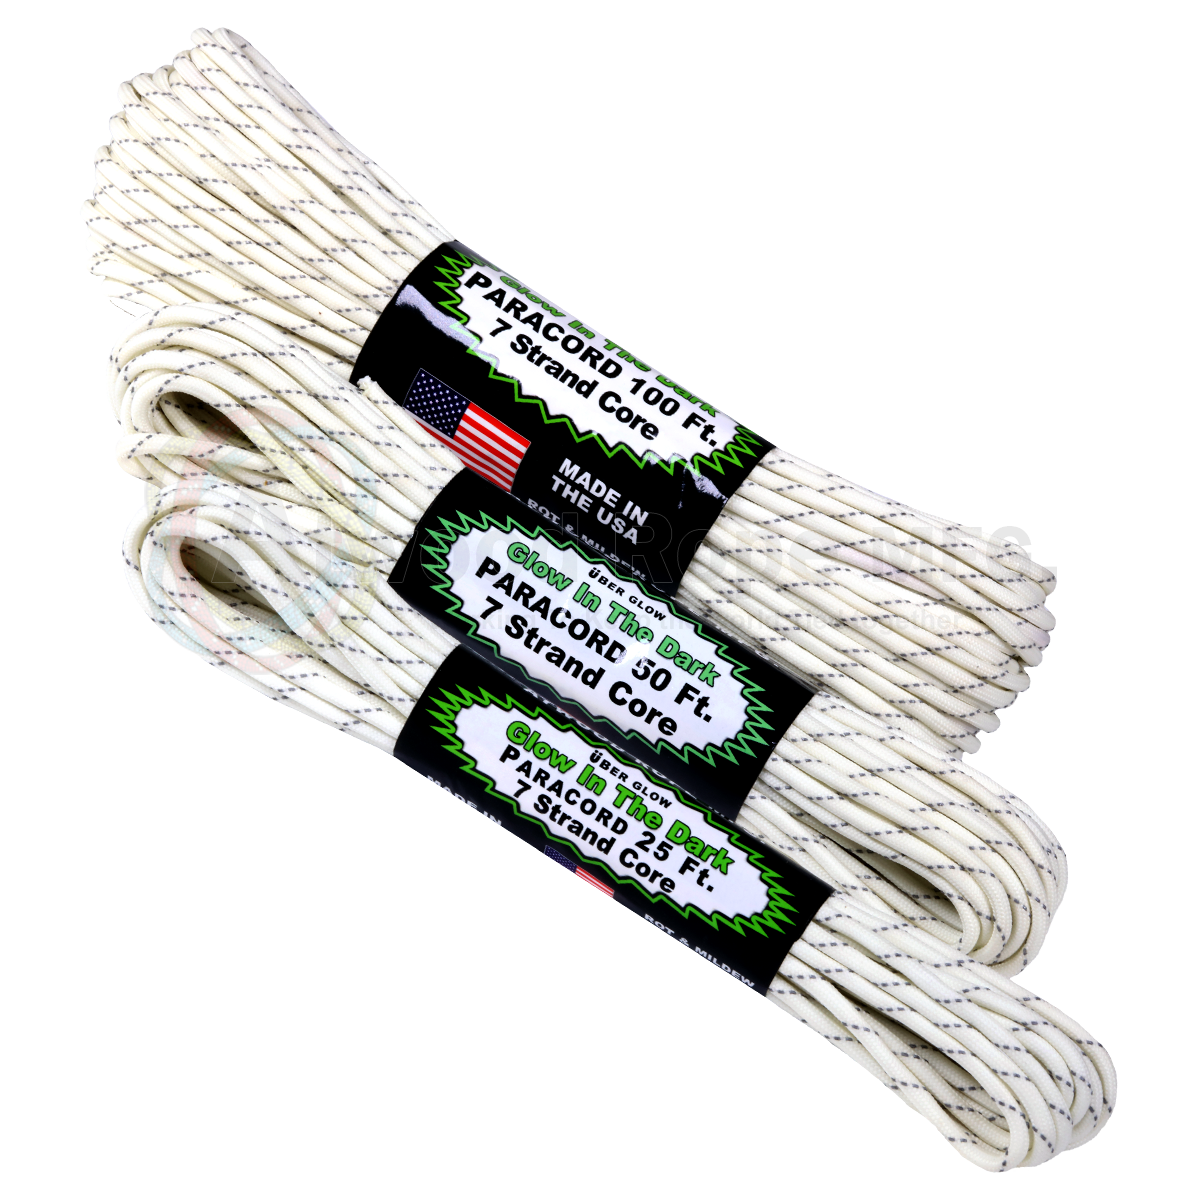  Reflective Paracord Rope 1000Ib - 500ft 4mm 12 Strand